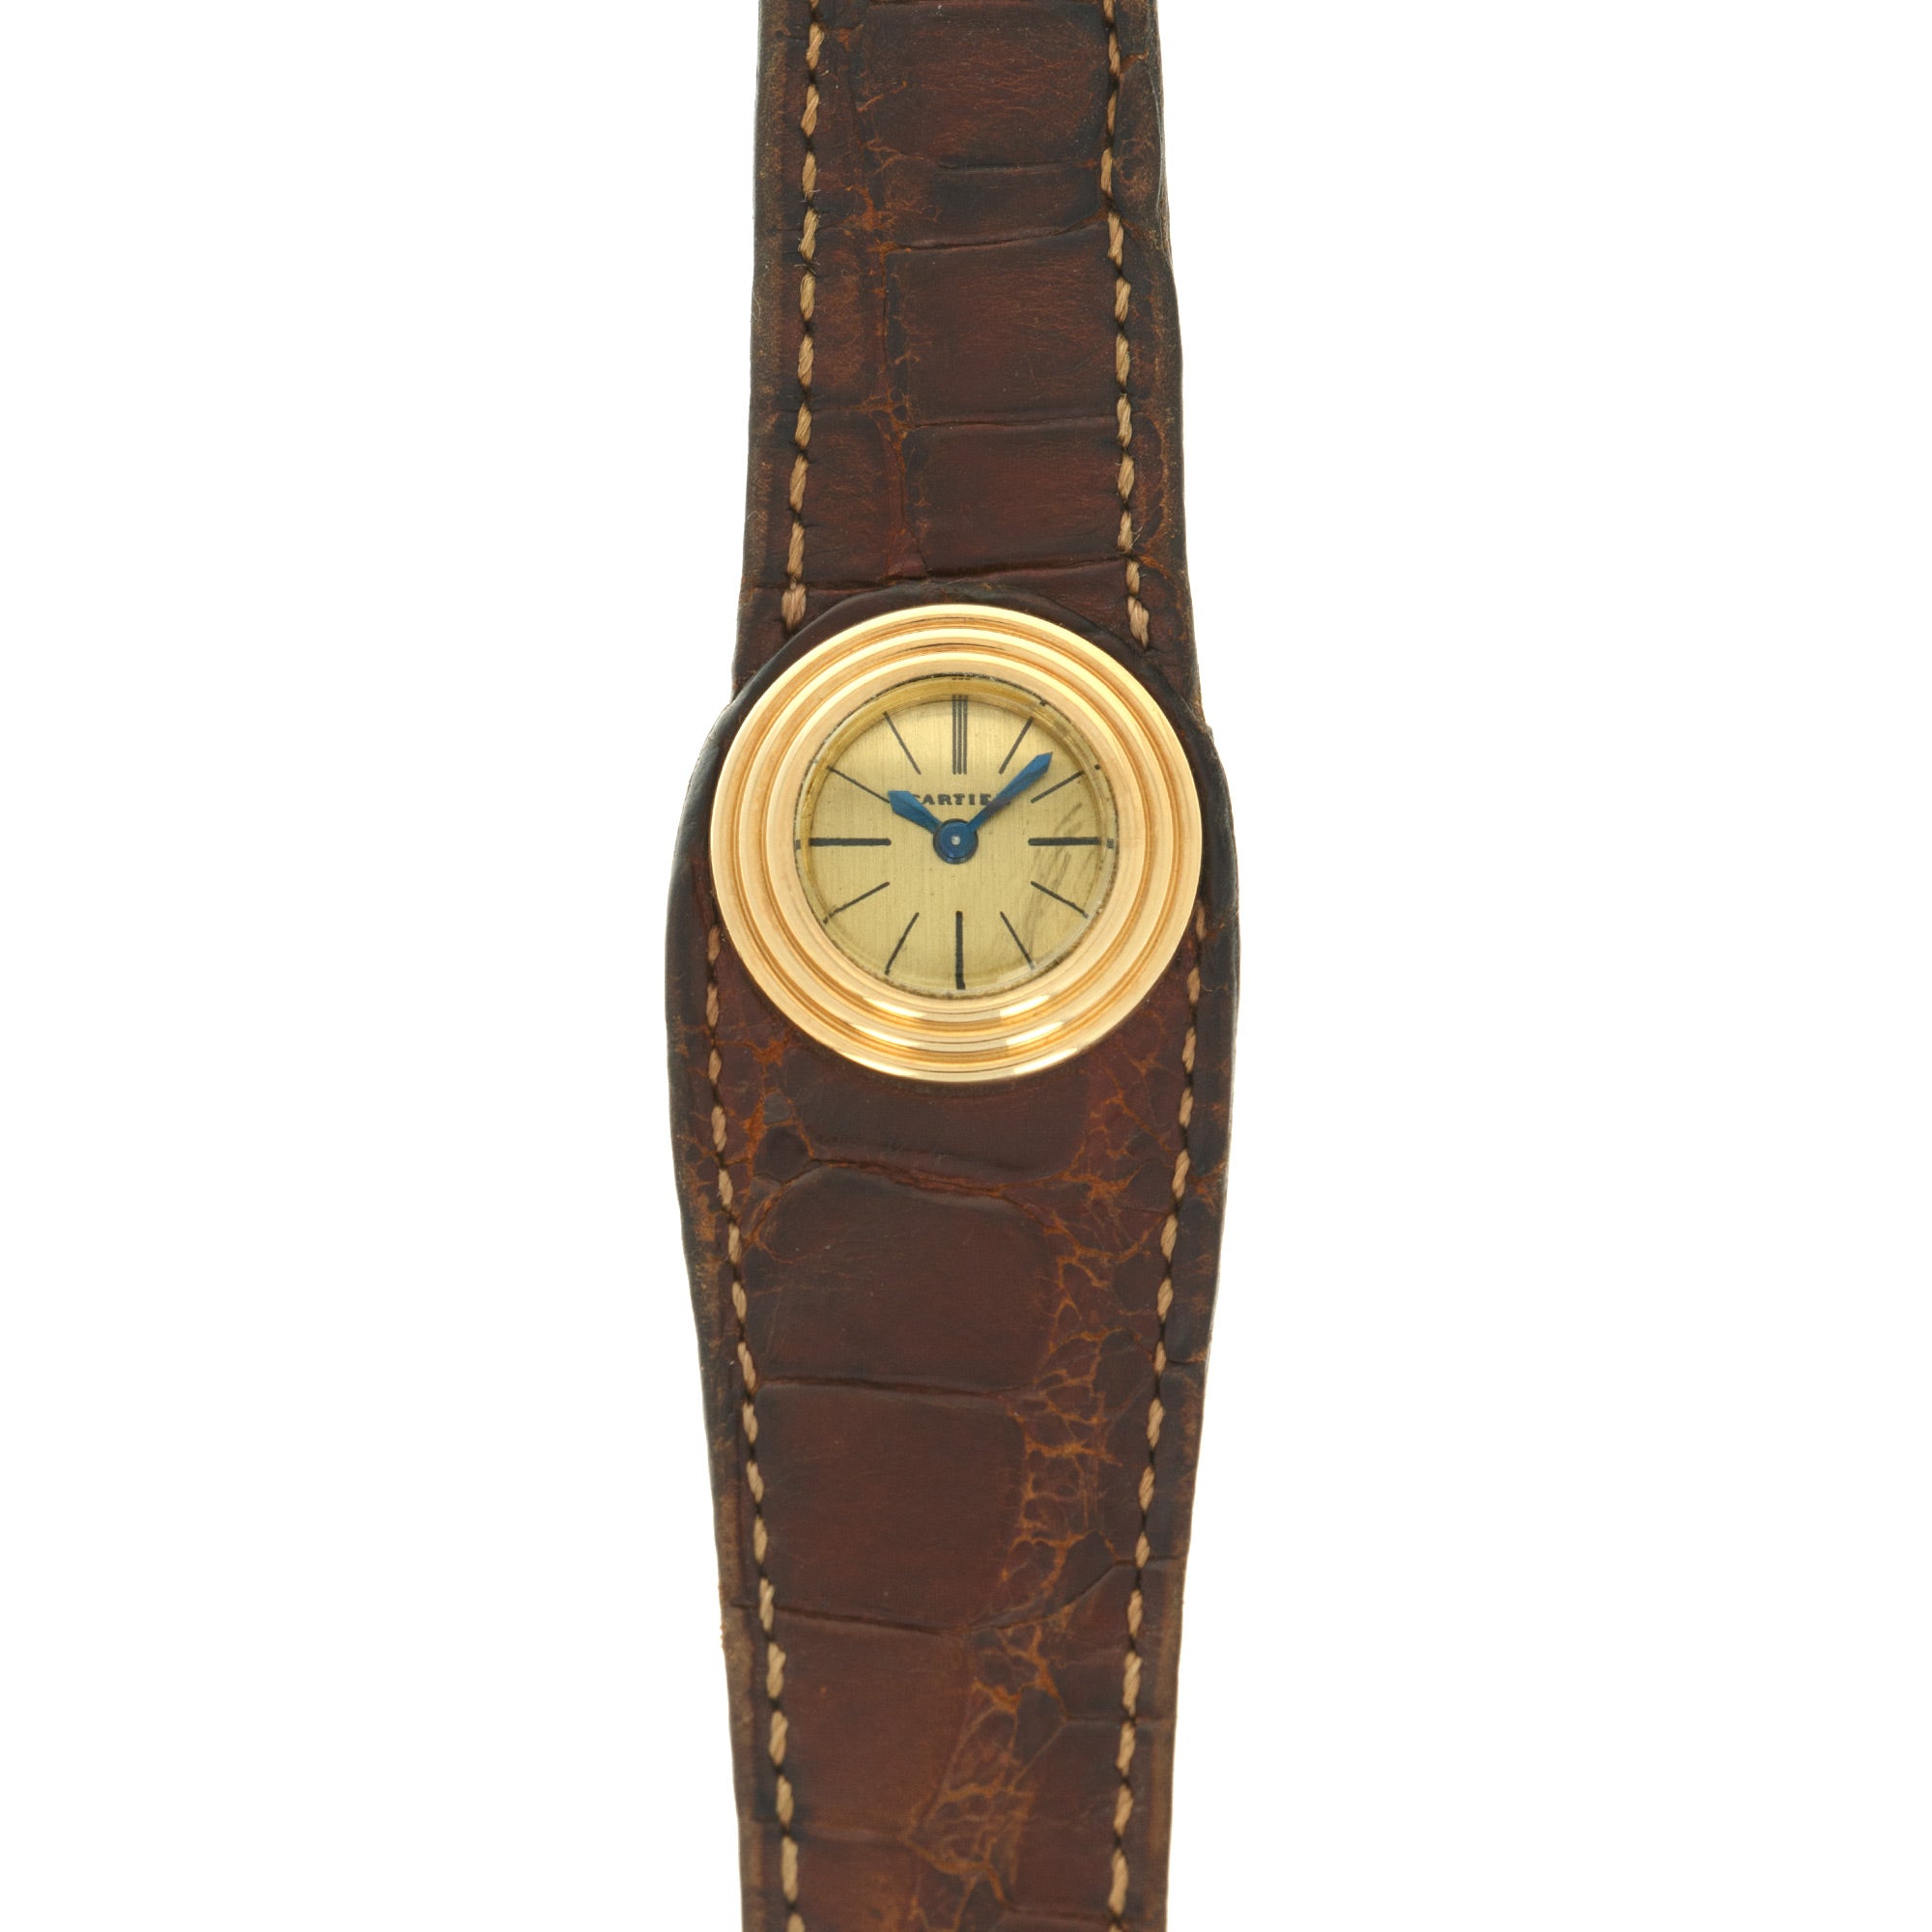 Cartier - Cartier Yellow Gold Leather Watch, As Seen in George Gordons Cartier Book - The Keystone Watches